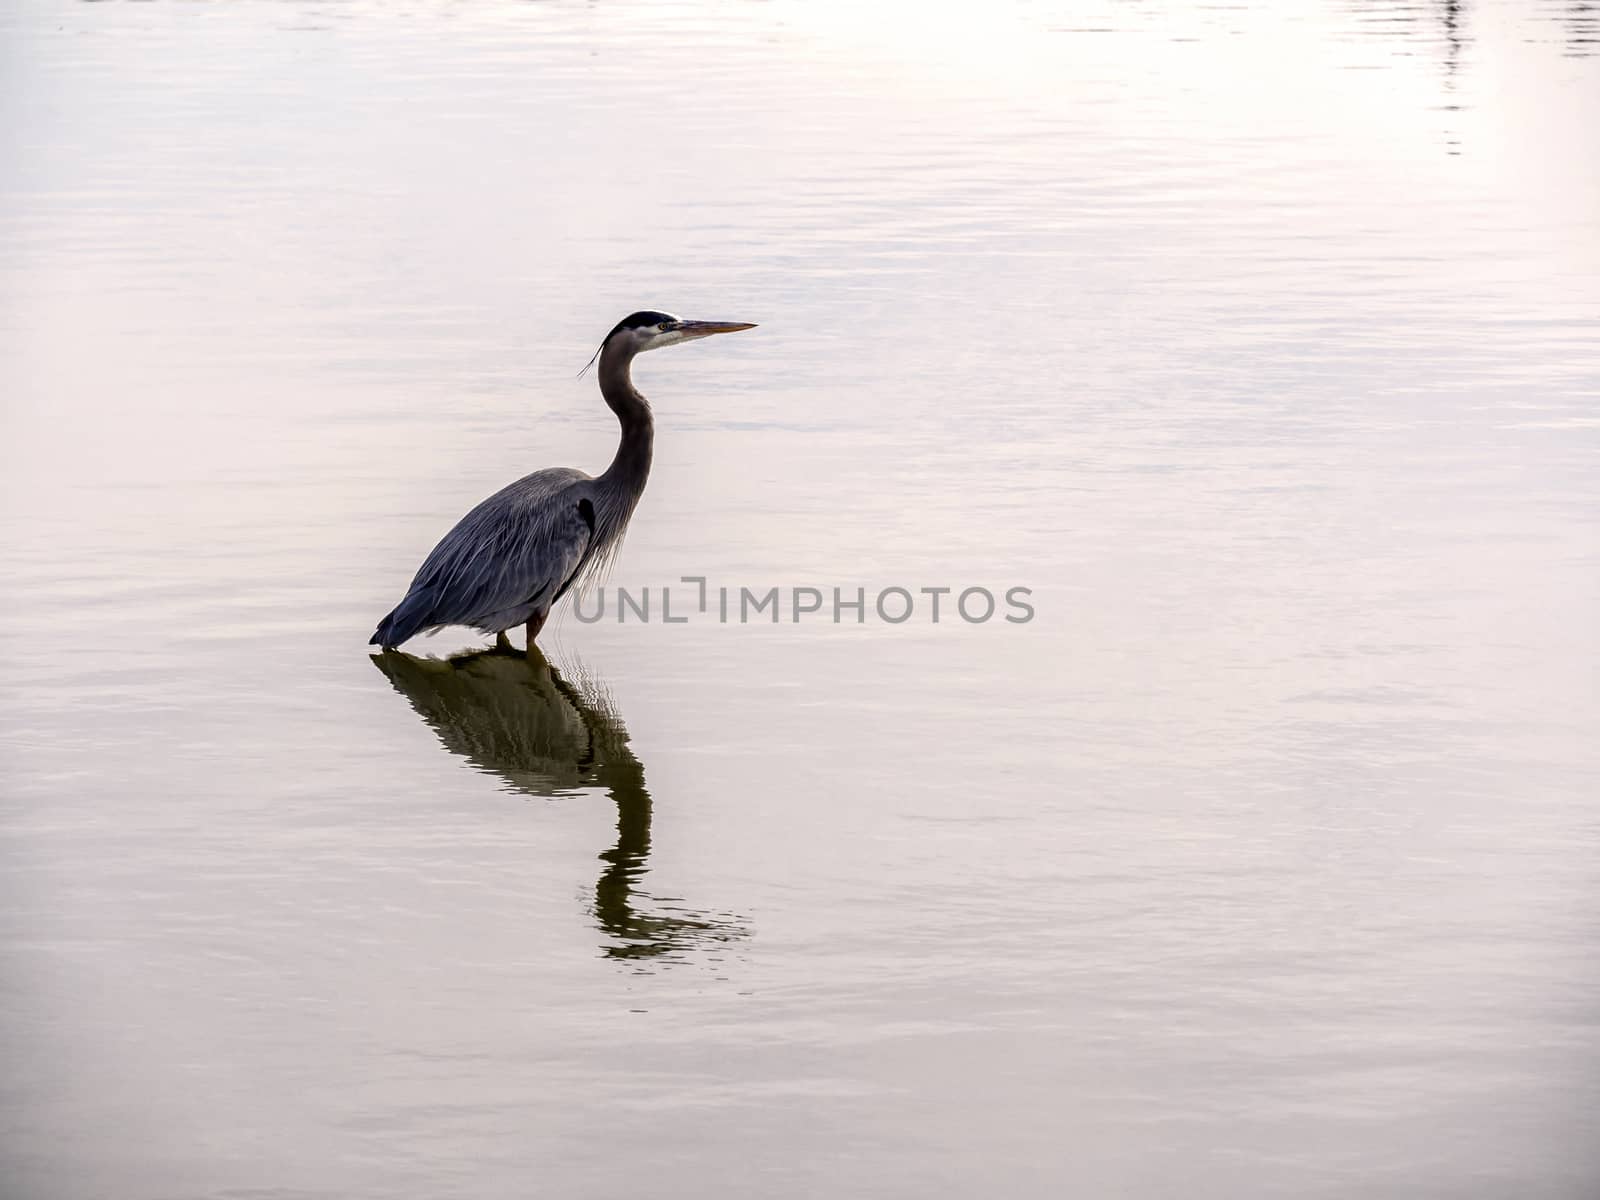 Crane in Water - Waiting for Prey (Morning Light) by leieng